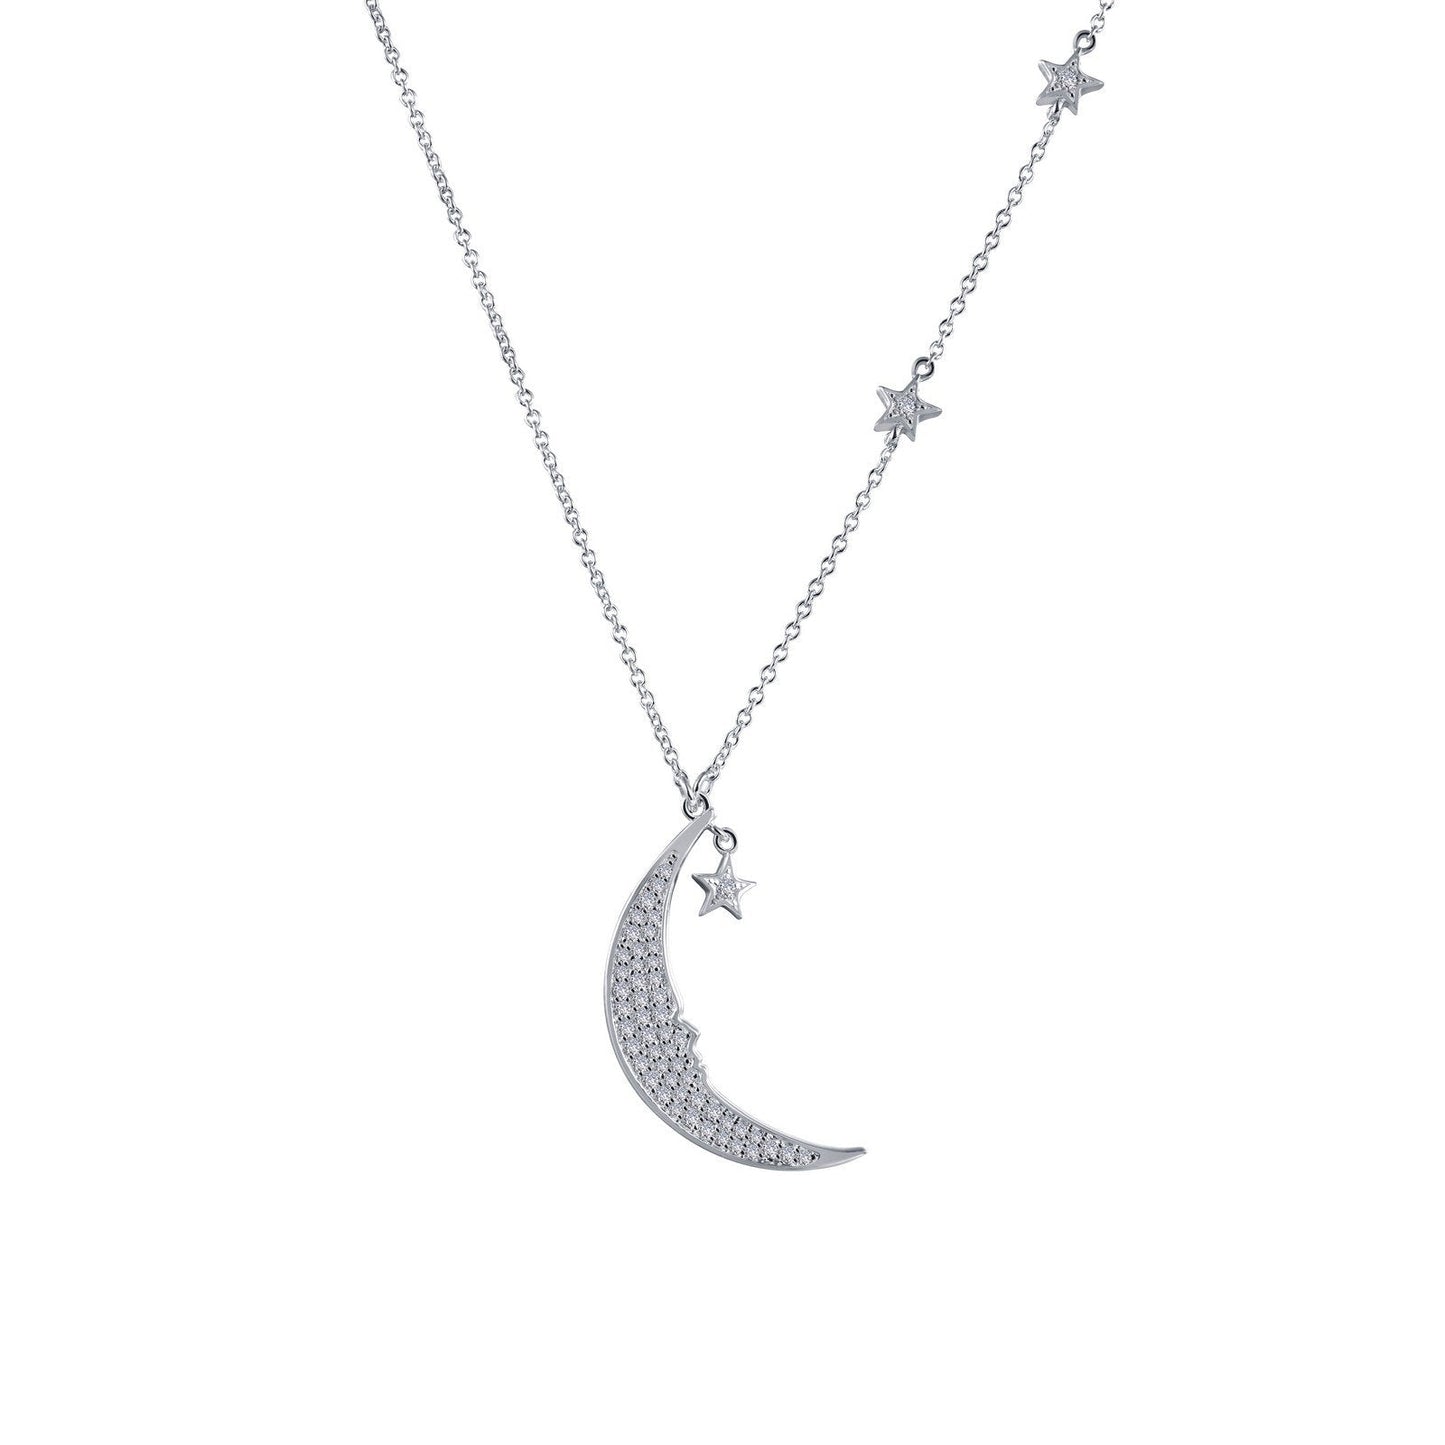 Lafonn Moon & Star Necklace Simulated Diamond NECKLACES Platinum 0.56 CTS Approx. 5mm (W) x 23mm (H)